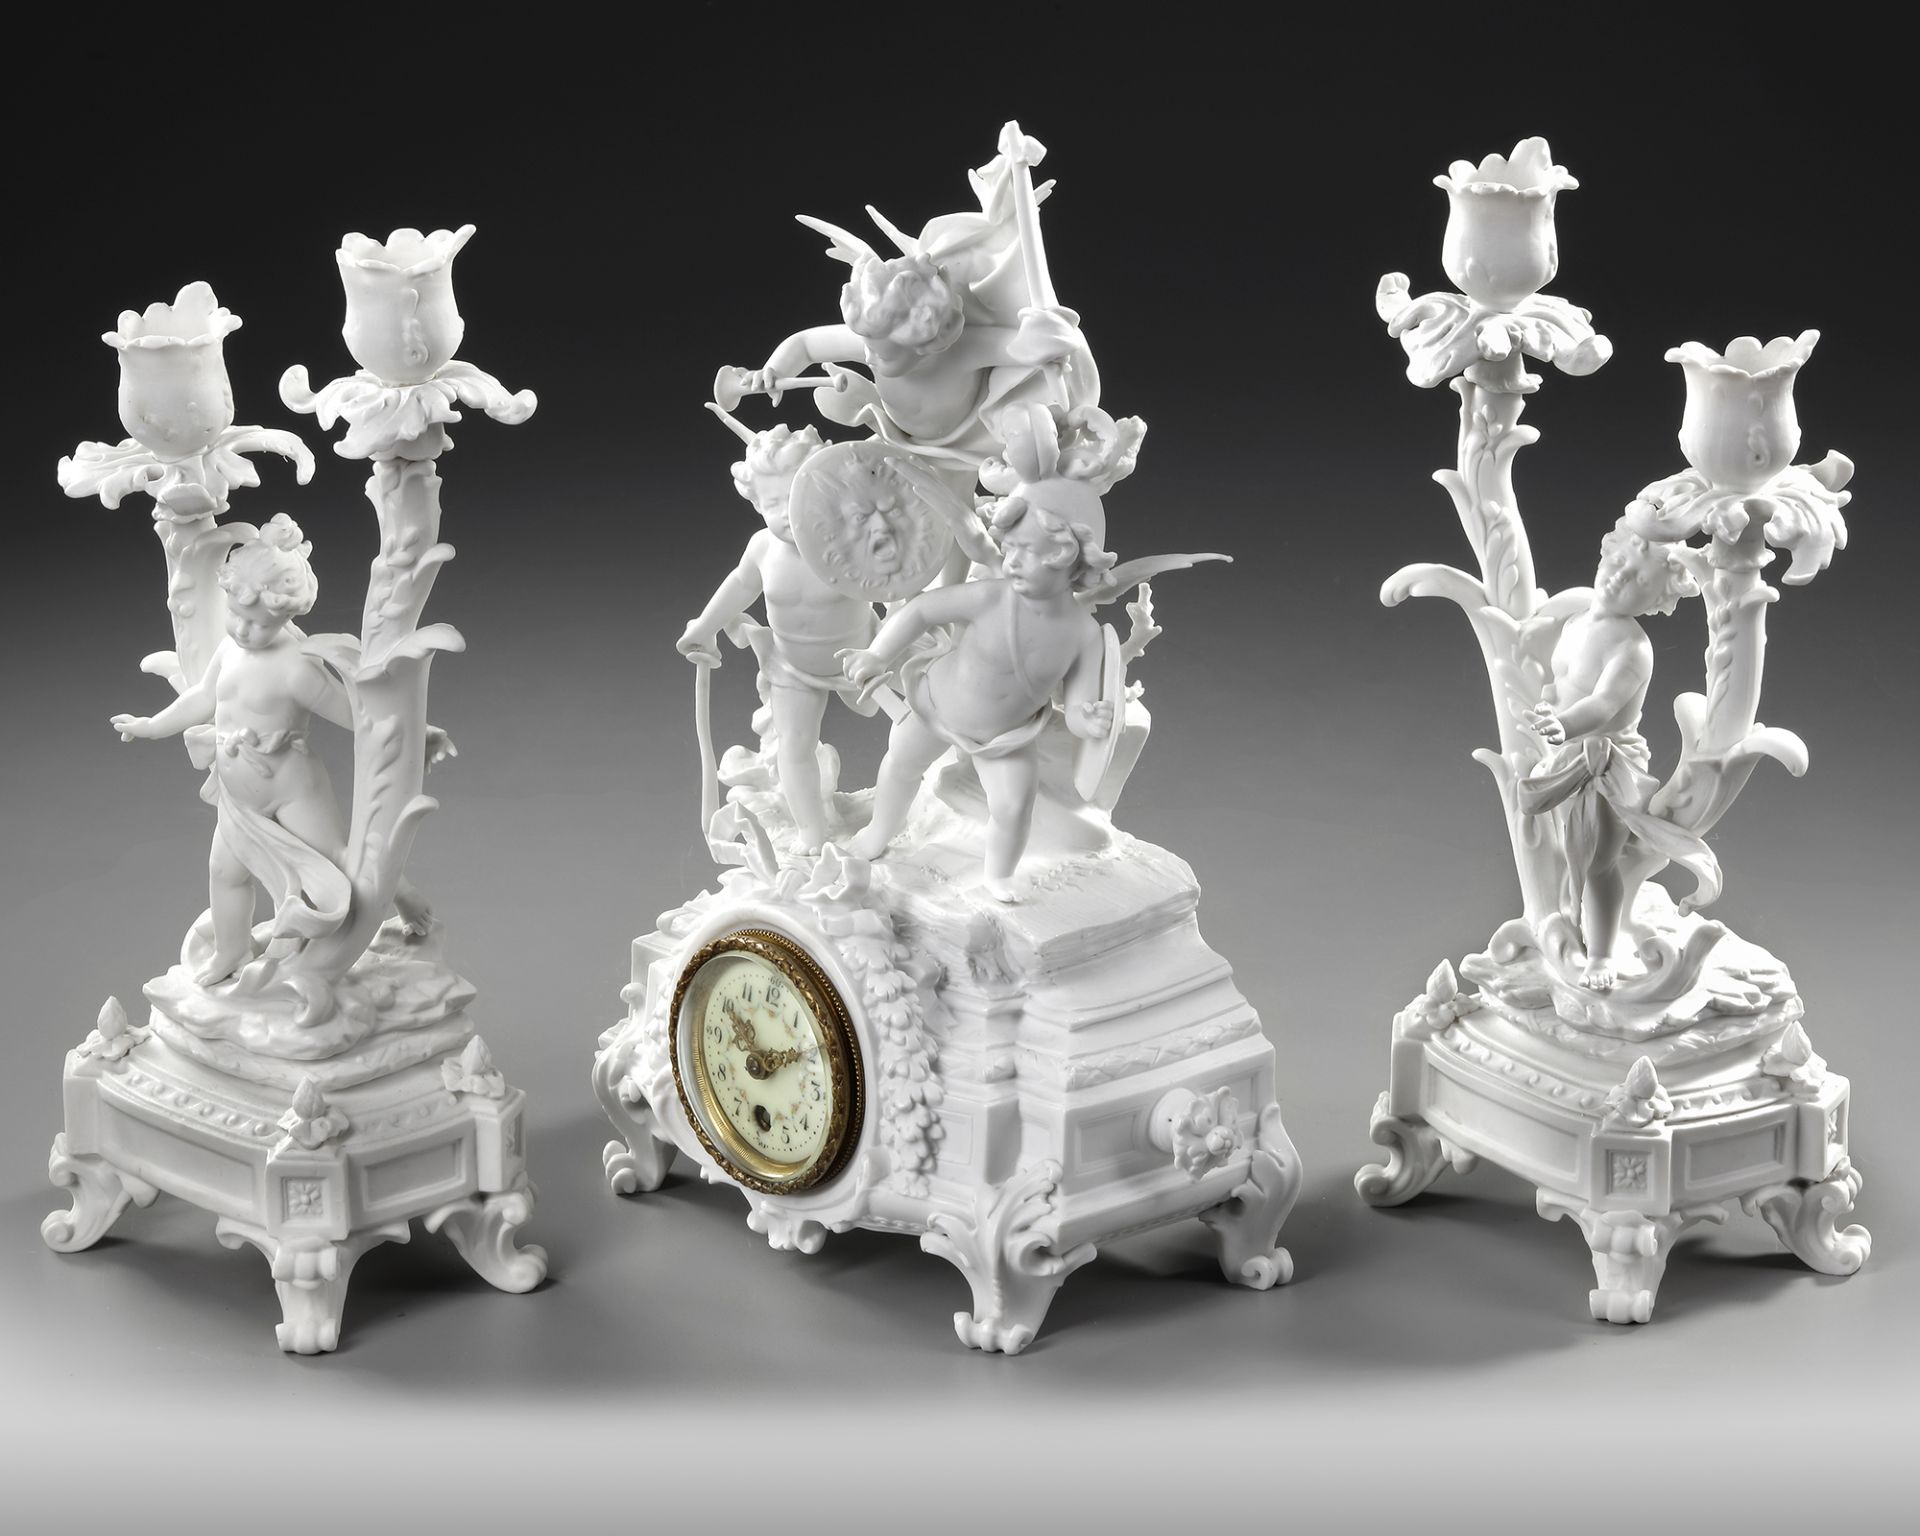 A FRENCH SEVRES BISCUIT CLOCK SET, 19TH CENTURY - Image 3 of 4